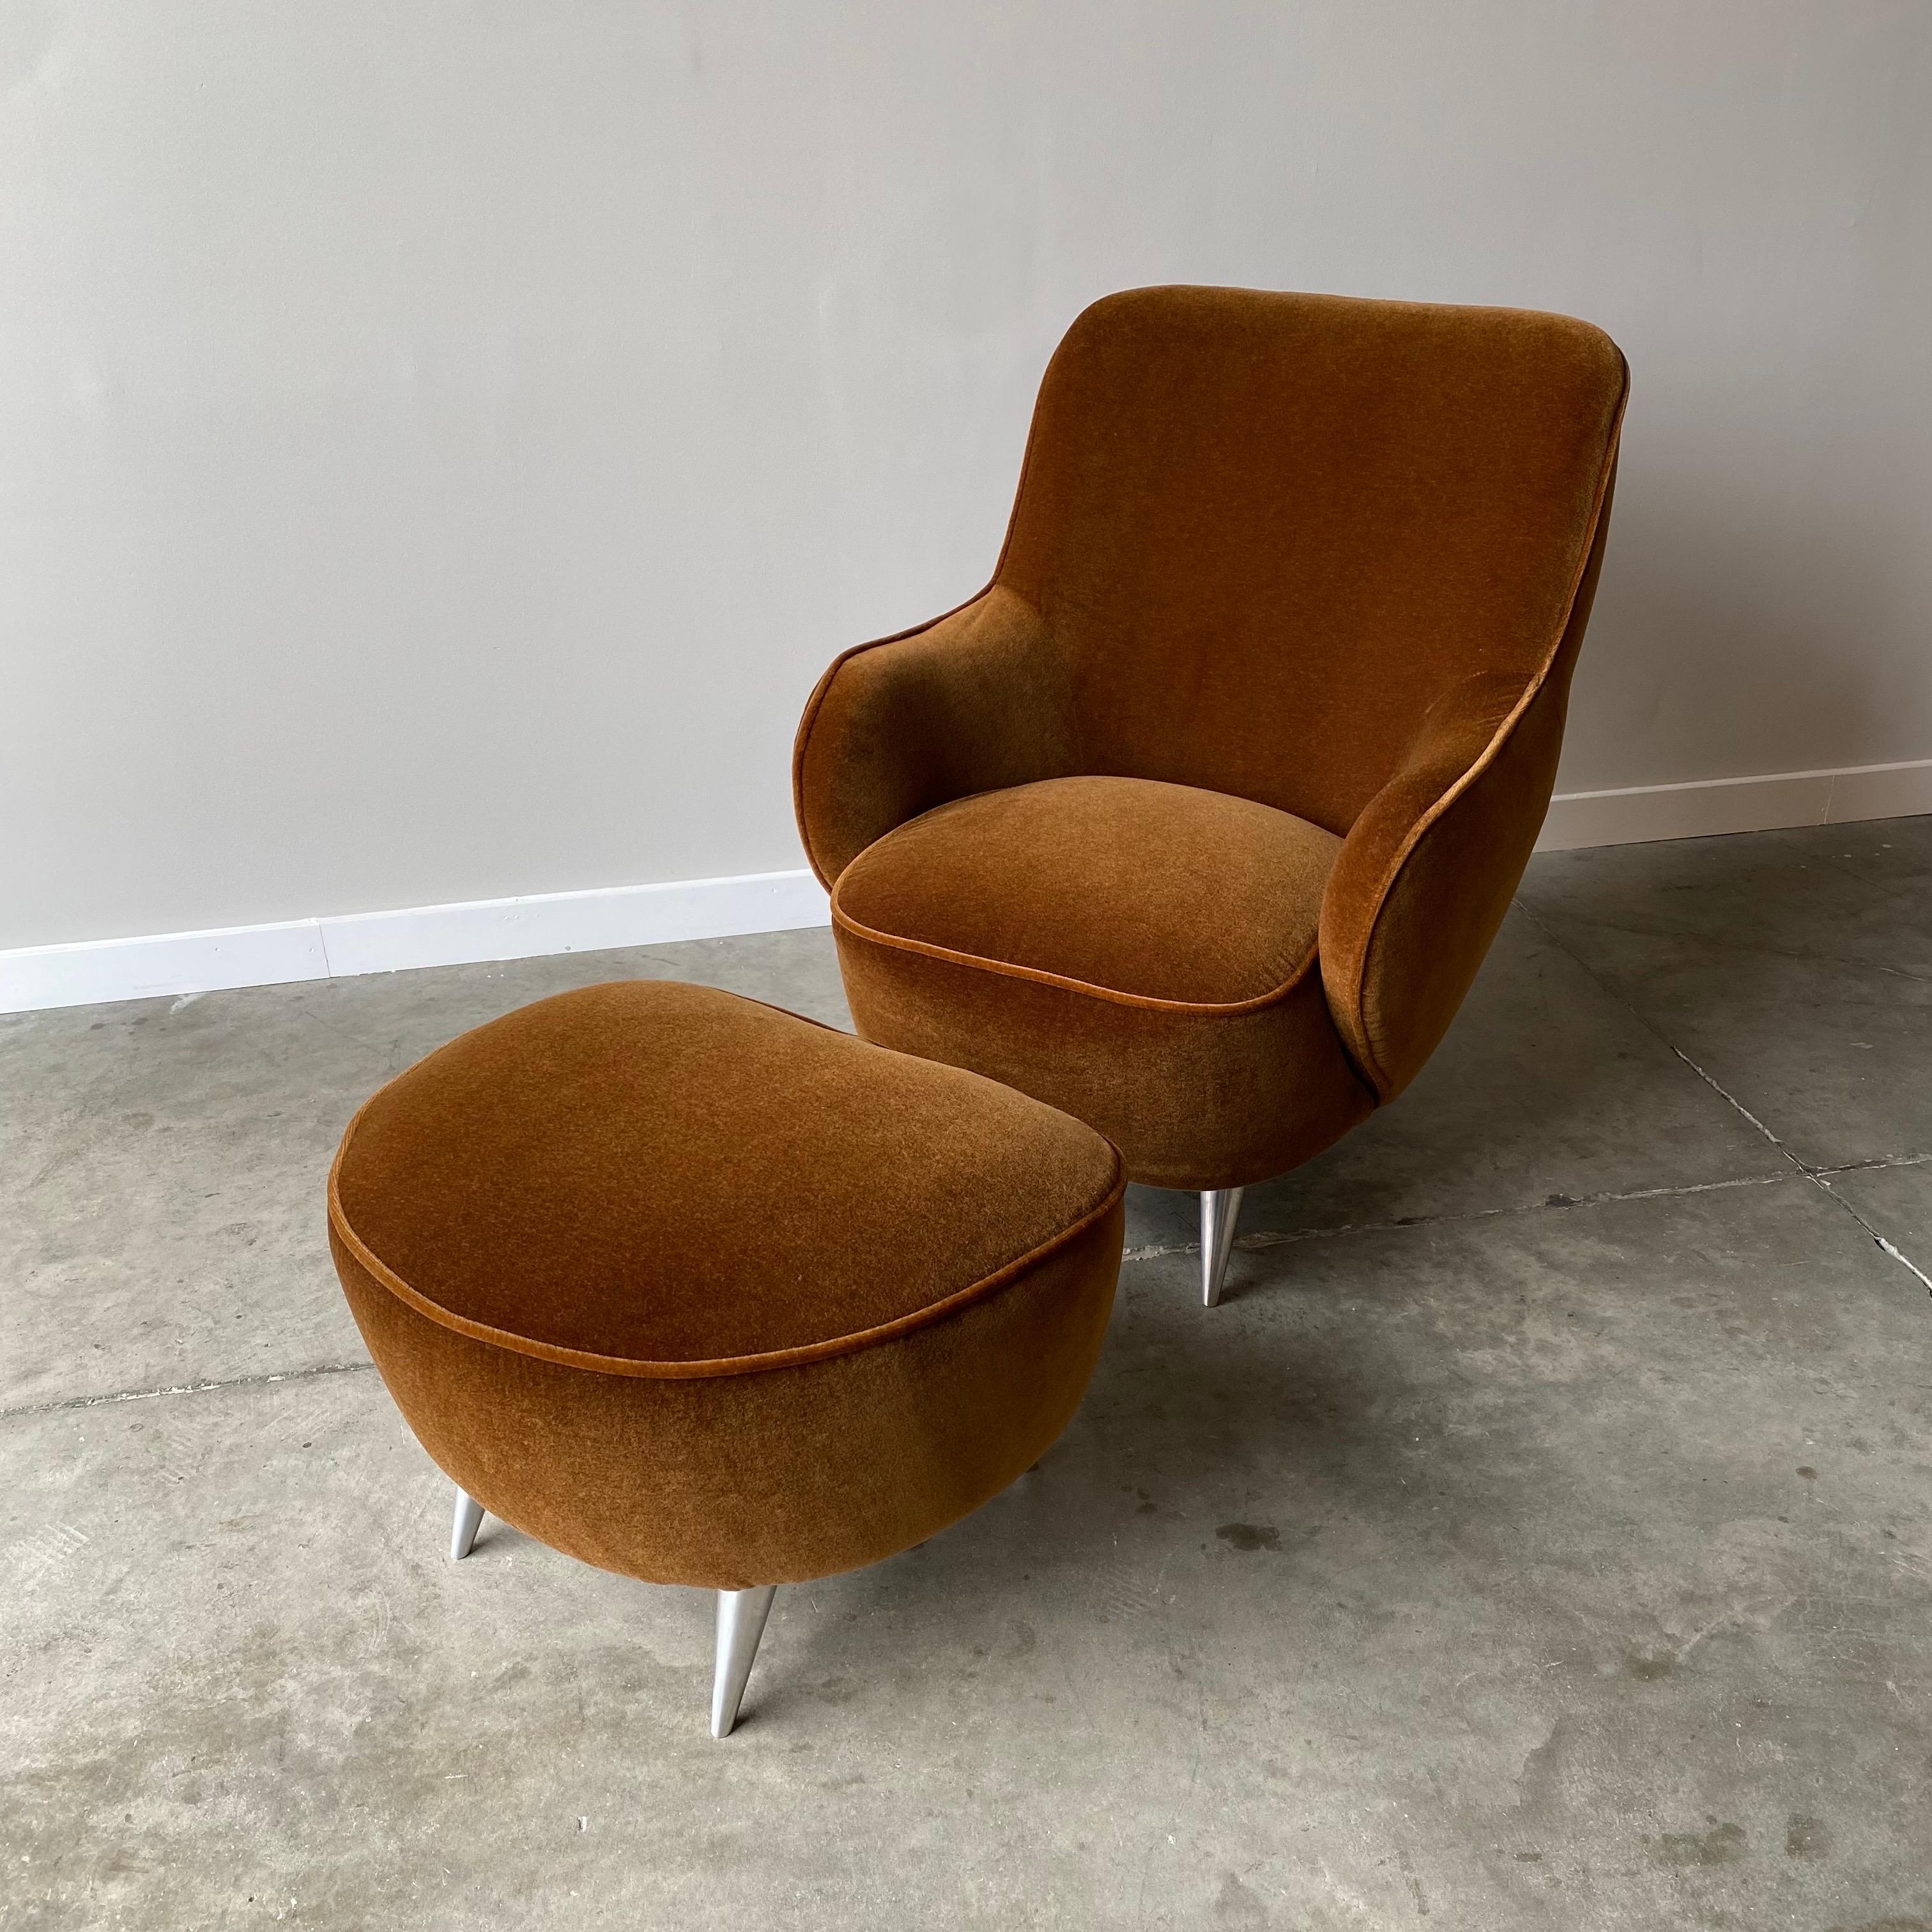 A striking set from the Vladimir Kagan New York Collection.  
Newly upholstered in a stunning brown mohair with brassy undertones, brushed aluminum legs.


Chair measures 36